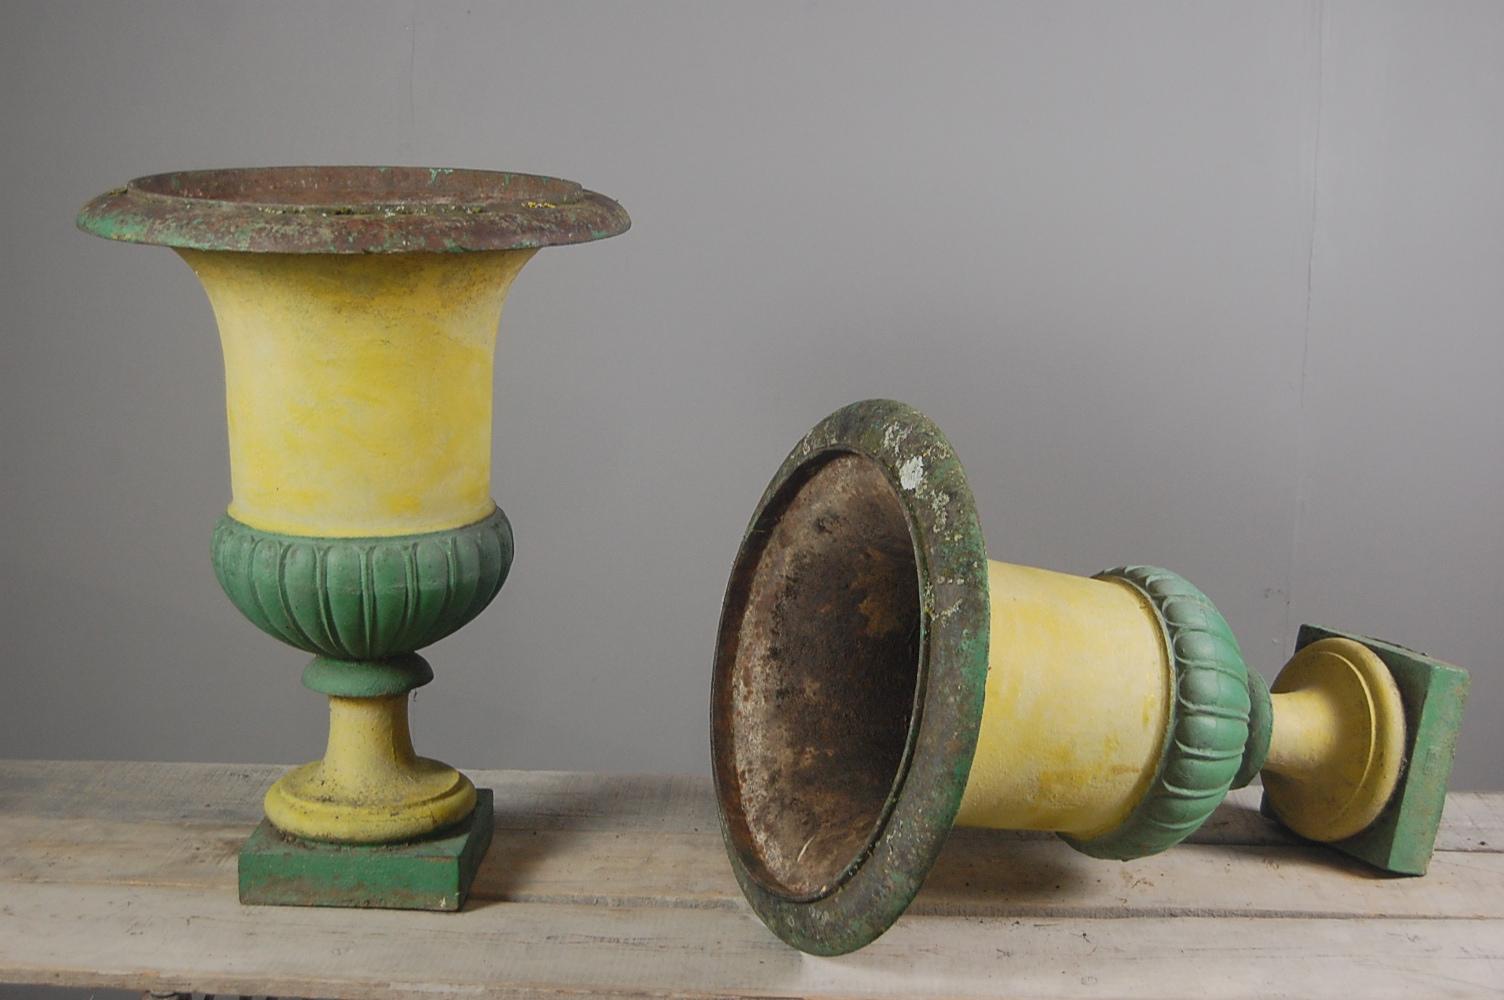 Pair of large form Campana urns in cast iron. Painted green and yellow, well weathered. These are from Provence, France, which may well explain the color and remarkable condition. France, early 20th century.